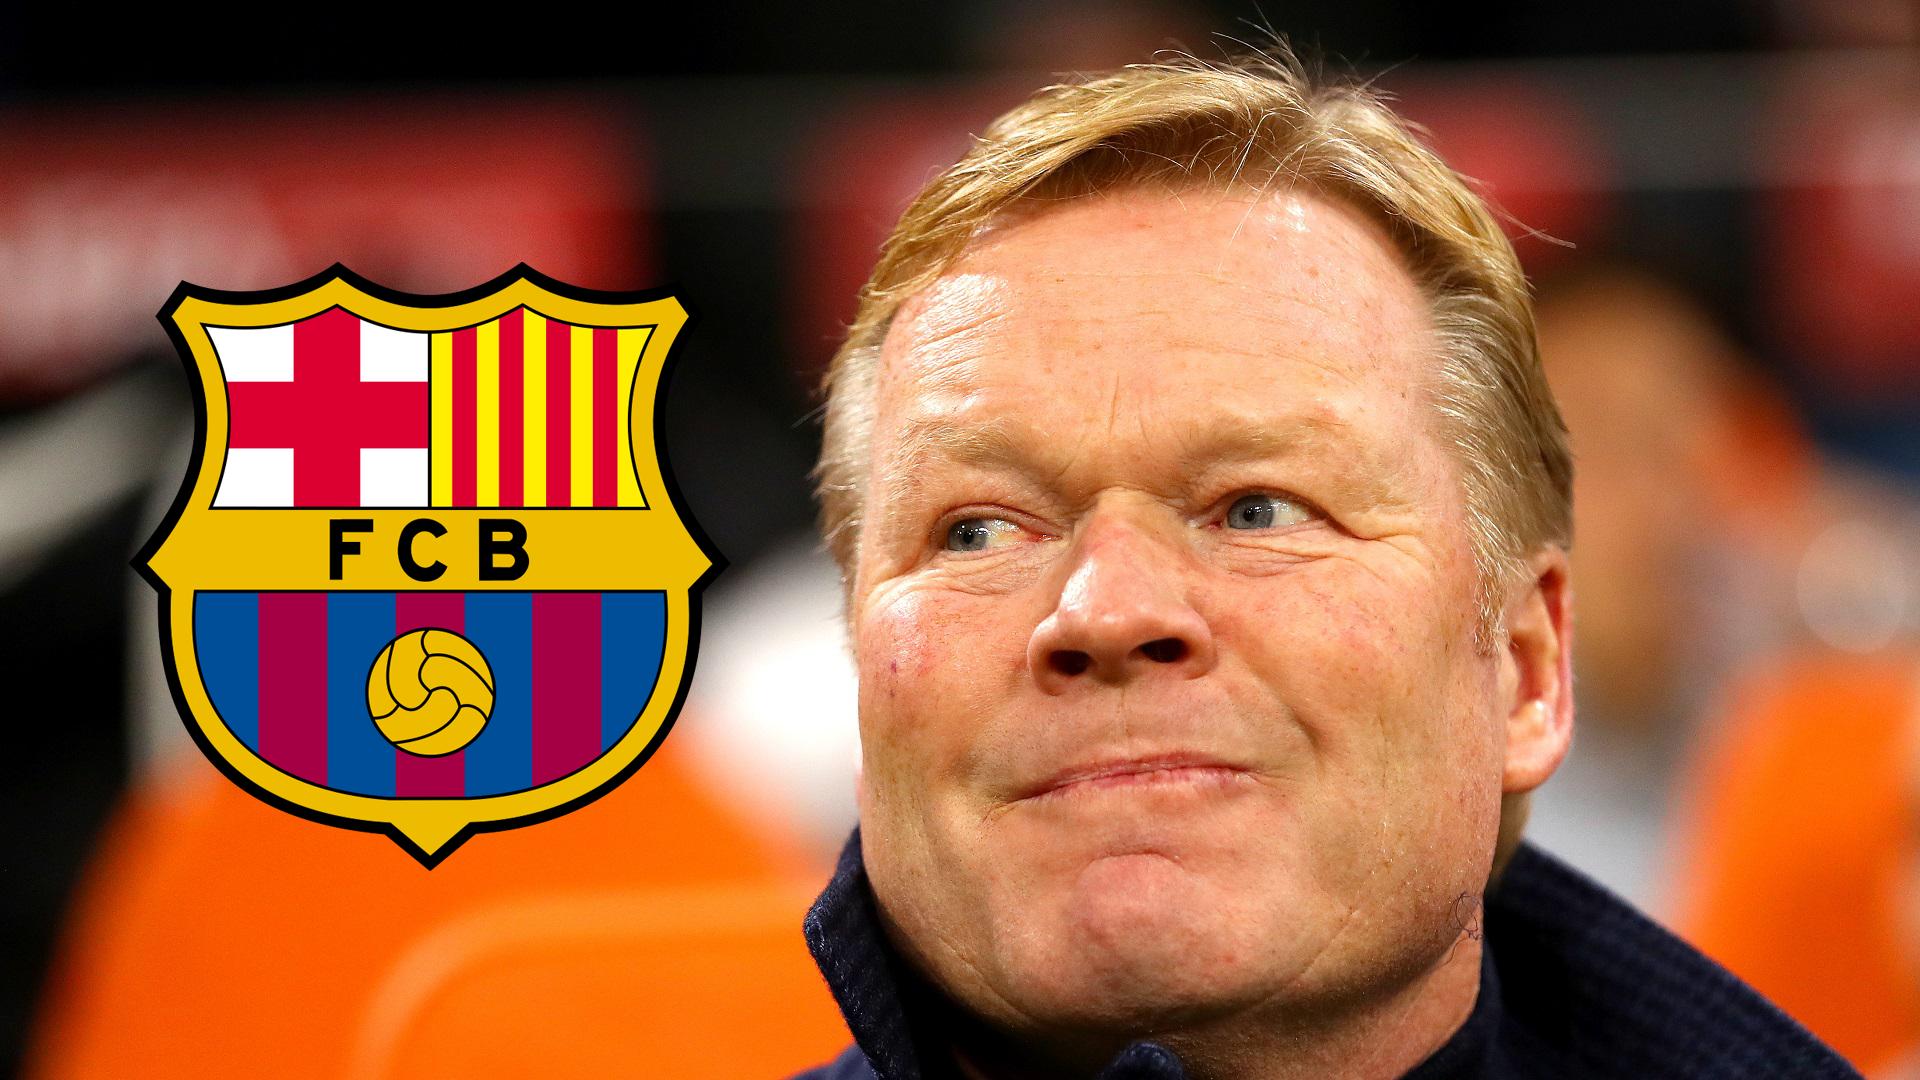 Barcelona confirm Koeman as new coach on contract to 2022 